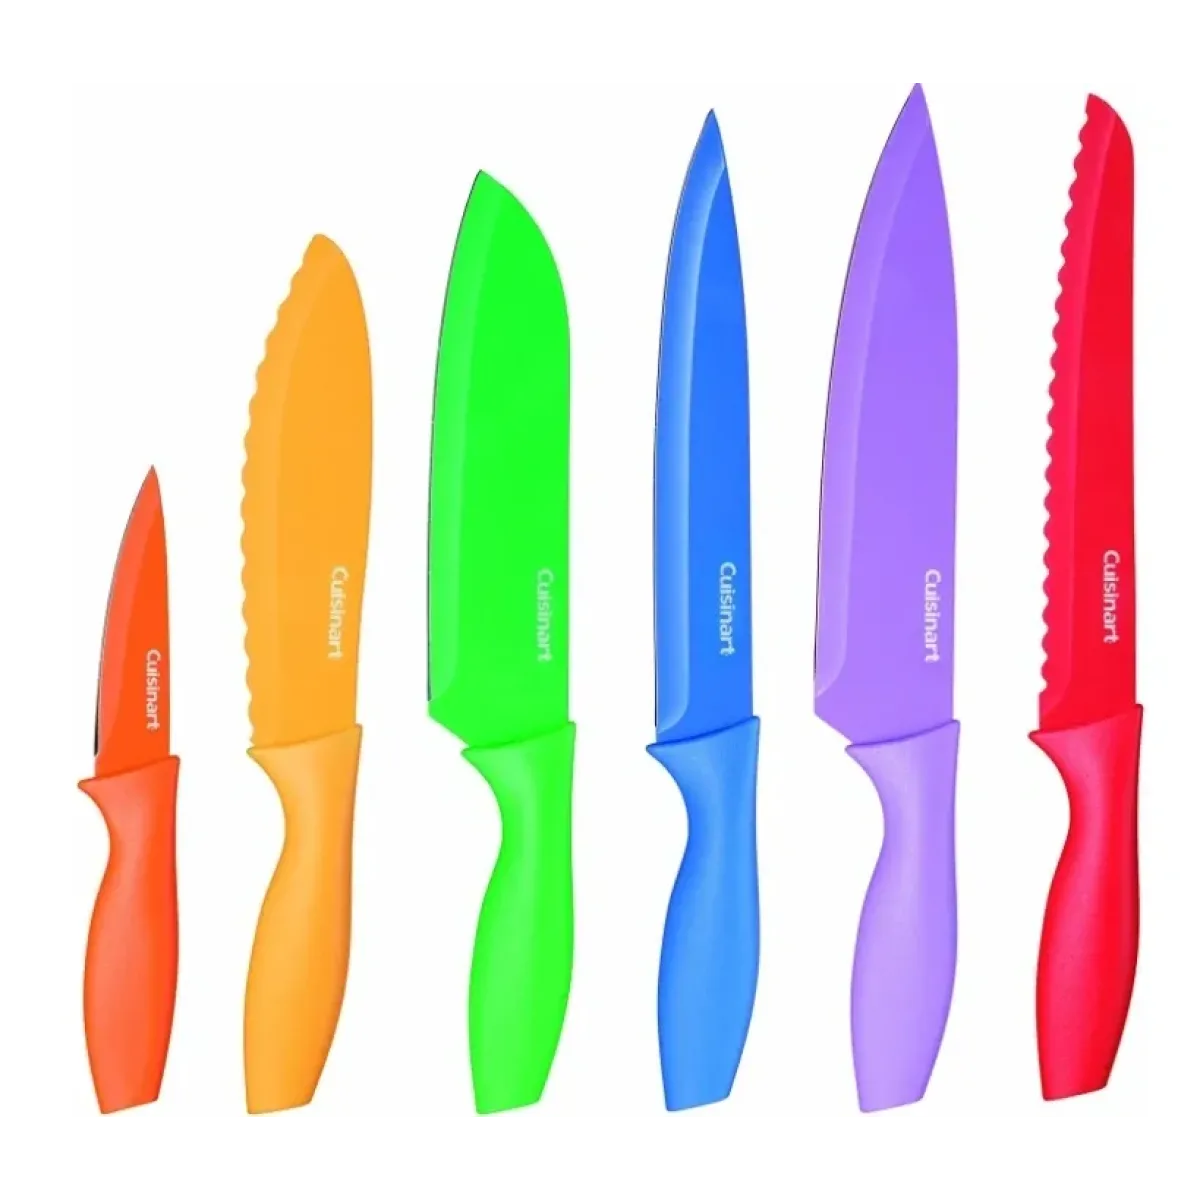 12-Piece Knife Set, Multicolor (New & Toivelled) 2